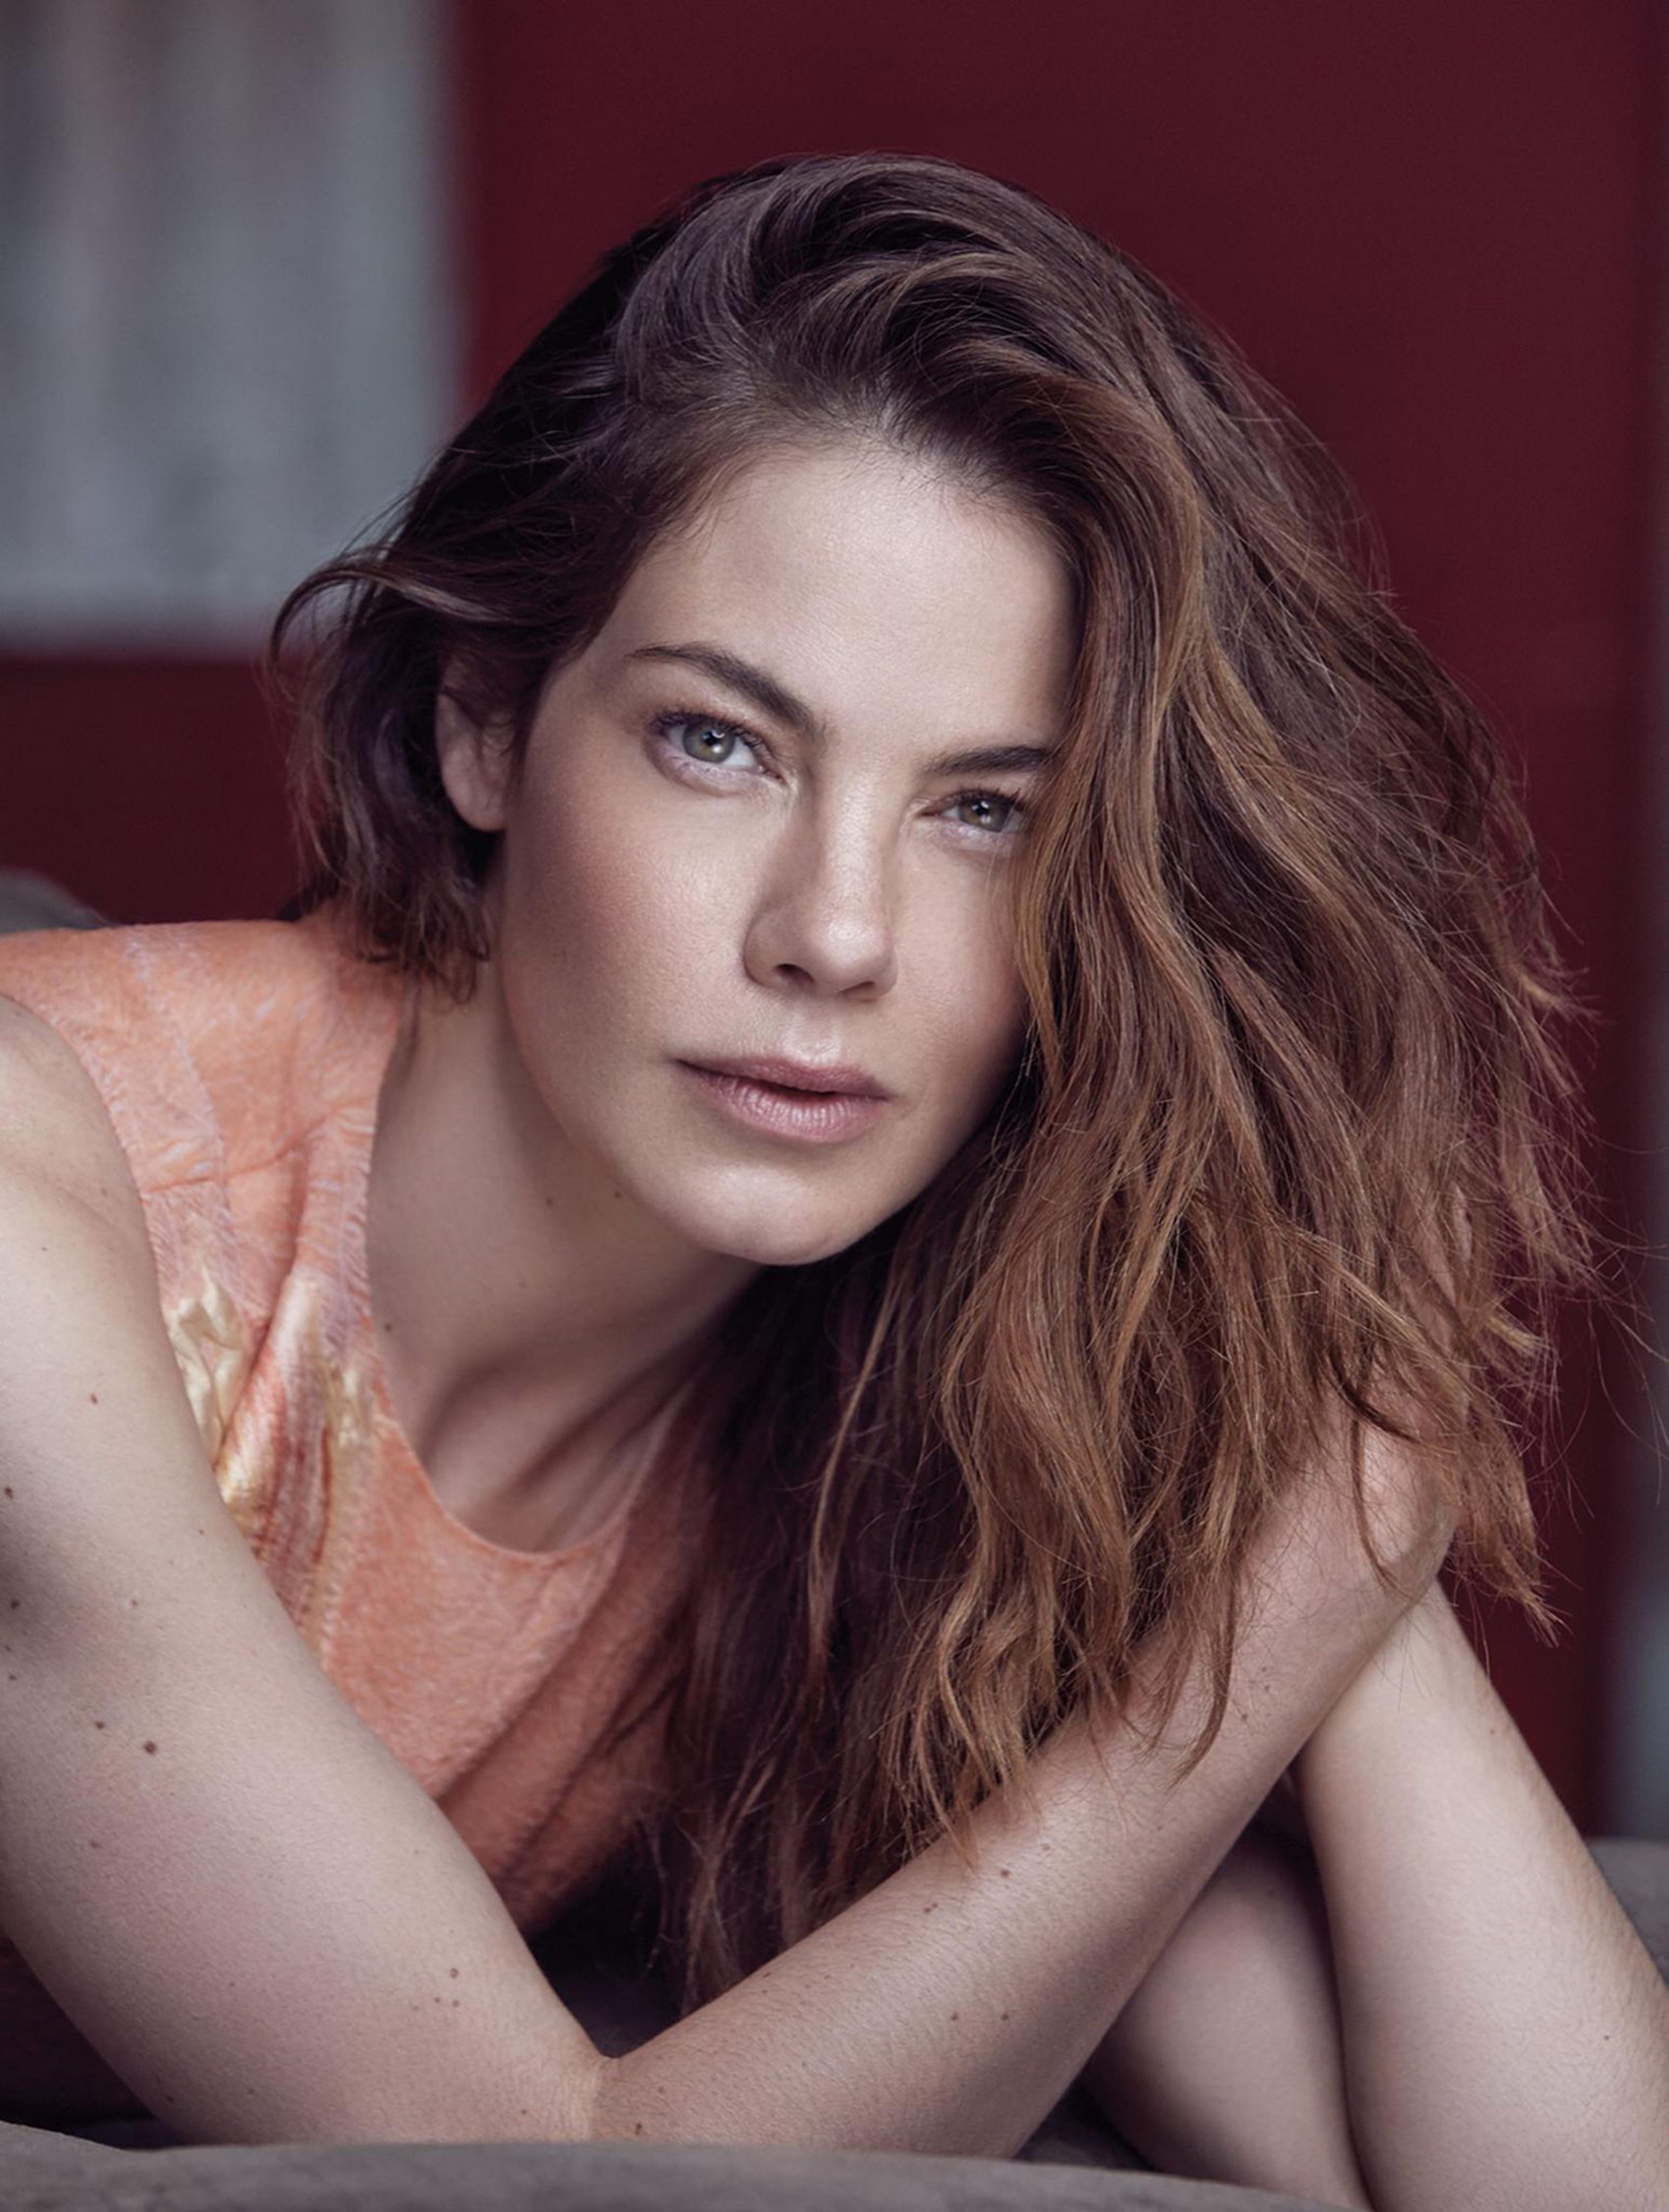 Michelle Monaghan sexy for NO TOFU magazine 2016 May 12x HQ photos 15.jpg